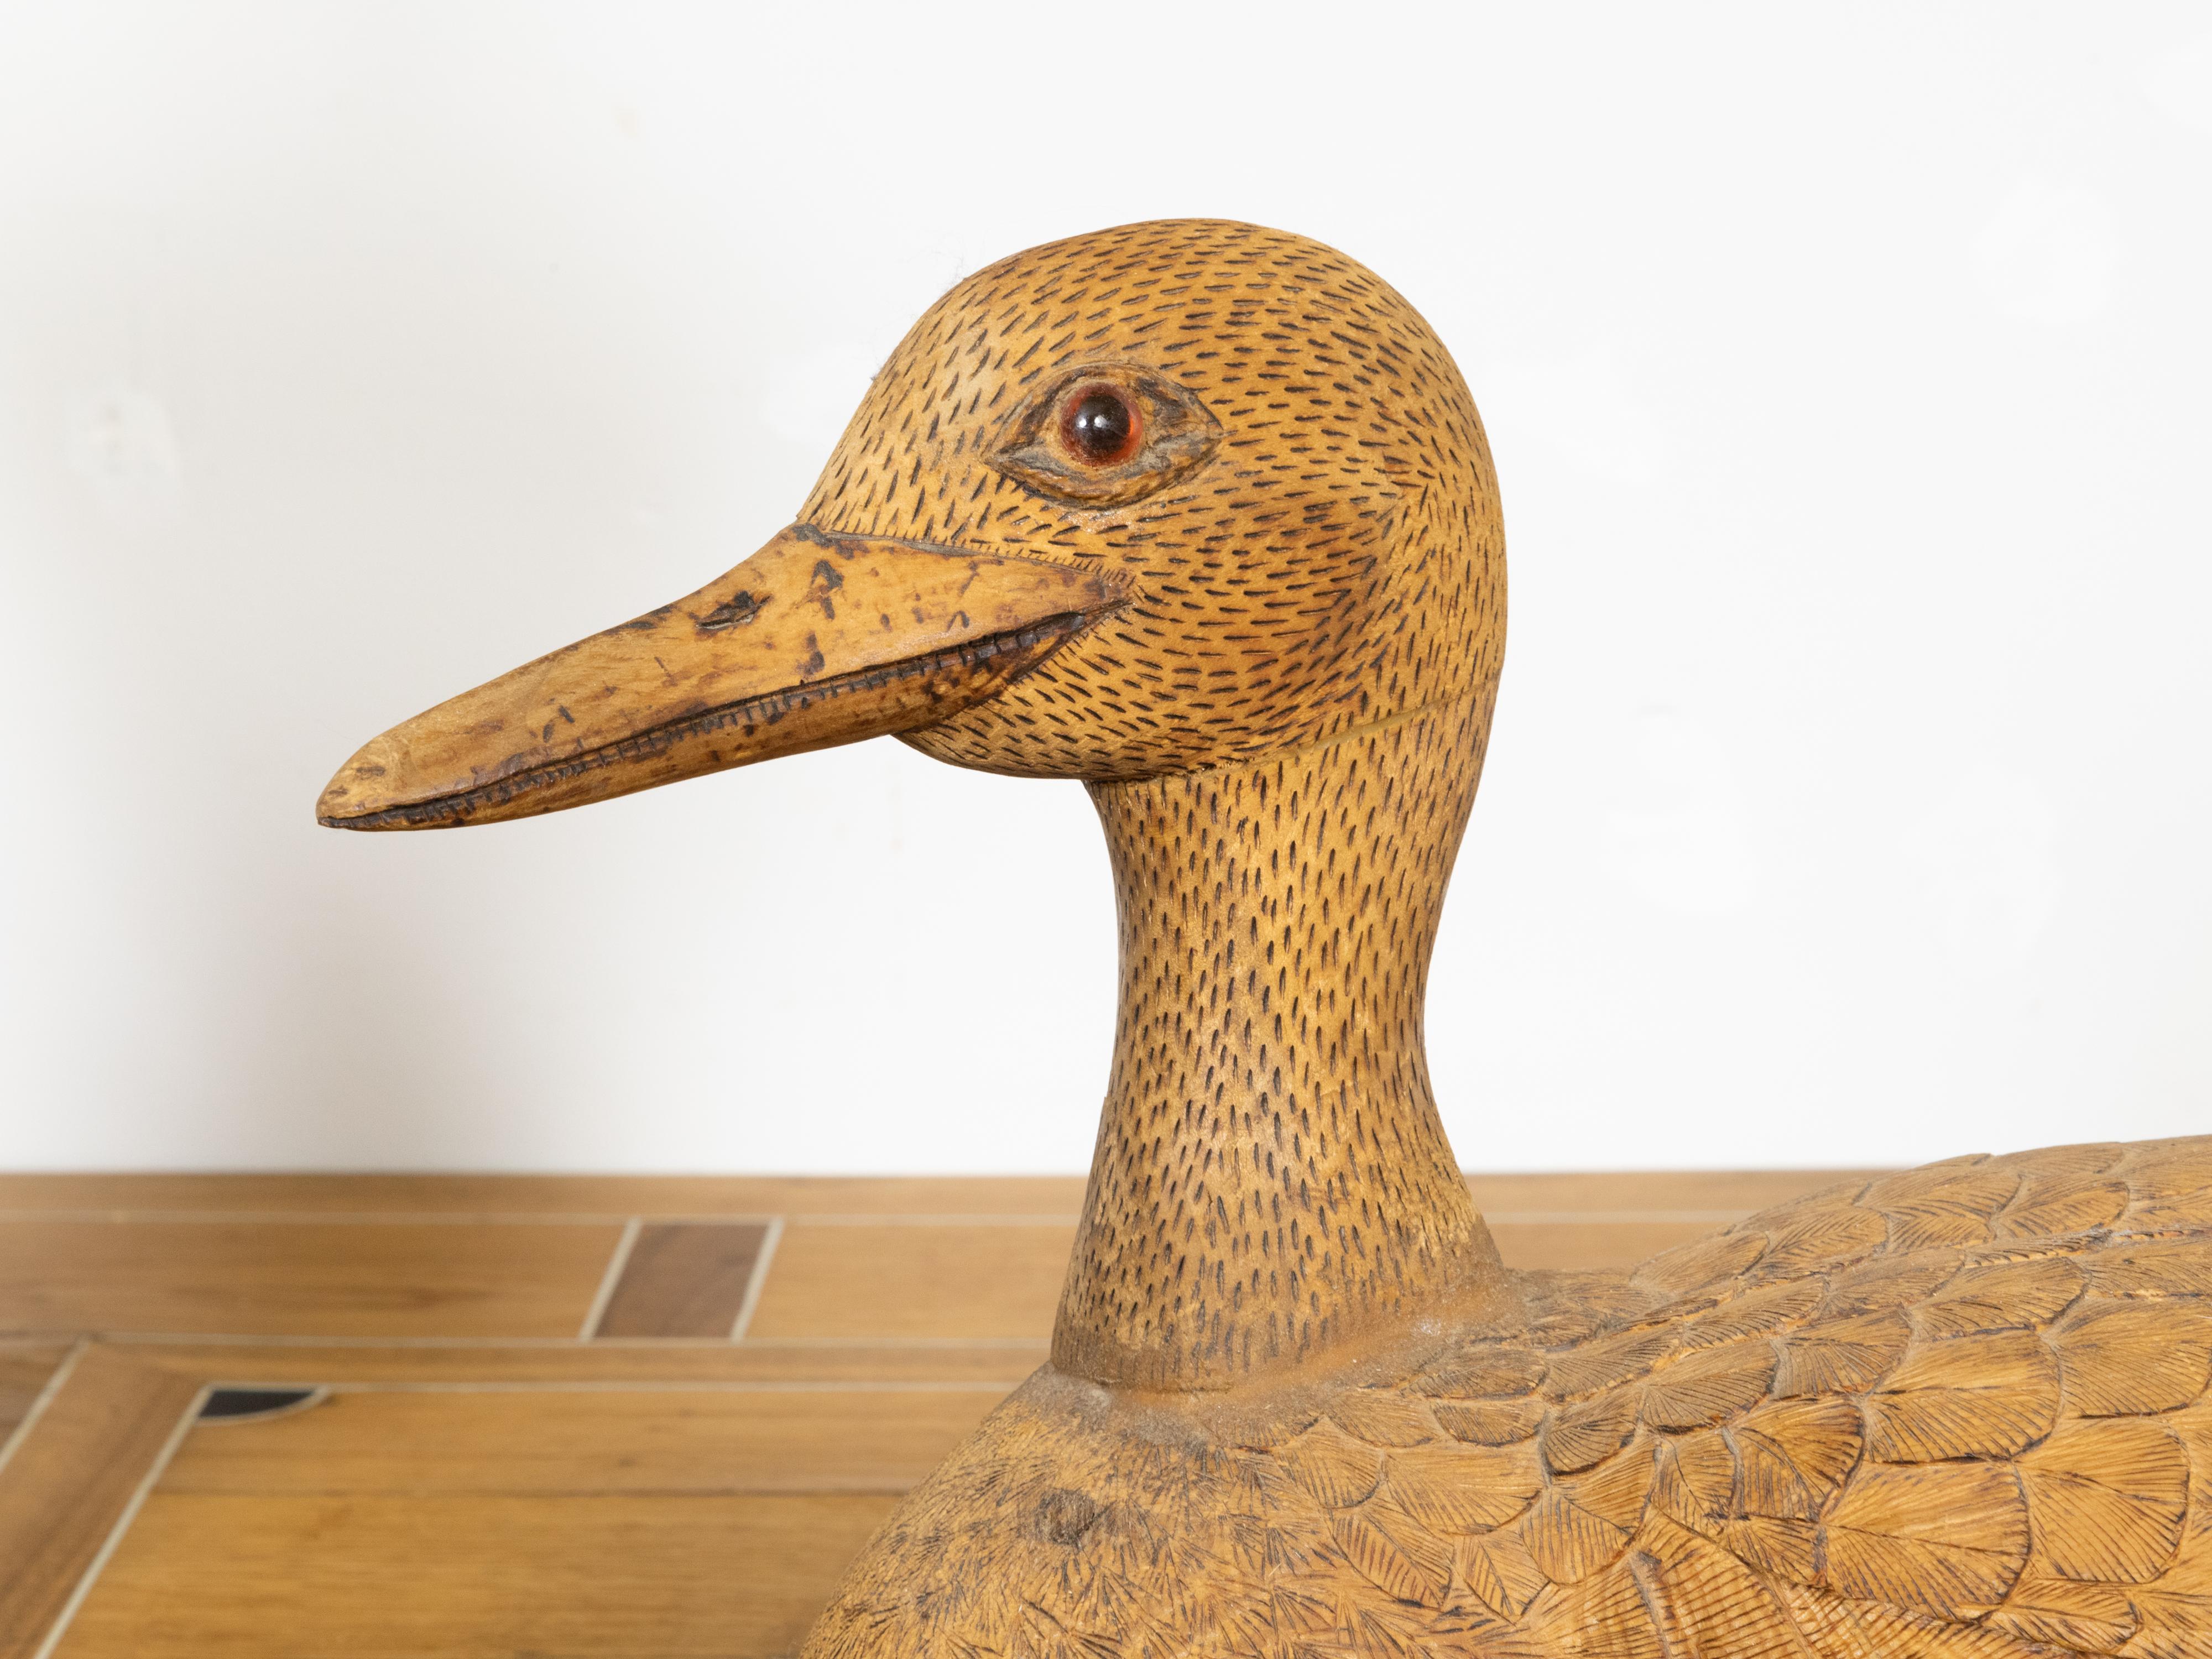 An English Victorian period carved wooden duck sculpture from the 19th century with nicely detailed plumage and brown eyes. Step back into the quaint charm of the Victorian era with this beautifully crafted English wooden duck from the 19th century,